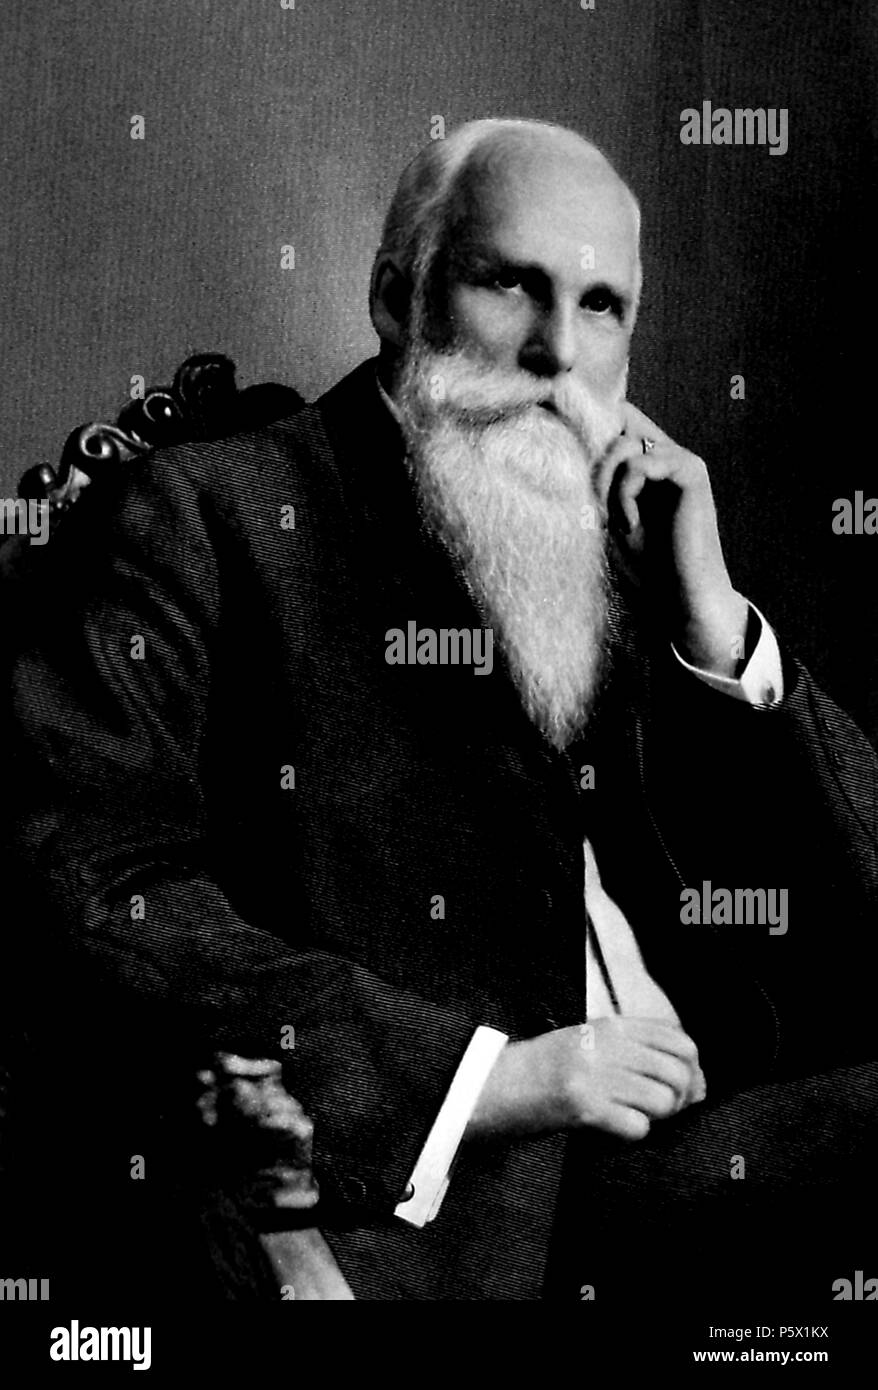 Black and white portrait photograph of Francis J Fluno, founder of Oakland's first Christian Scientist church, shown seated, in three-quarter view, with a white beard and mustache, a dark suit, and a thoughtful expression on his face, from the volume 'History of the State of California and Biographical Record of Oakland and Environs, ' authored by JM (James Miller) Guinn, and published in Los Angeles by the Historic Record Co, 1907. Courtesy Internet Archive. () Stock Photo